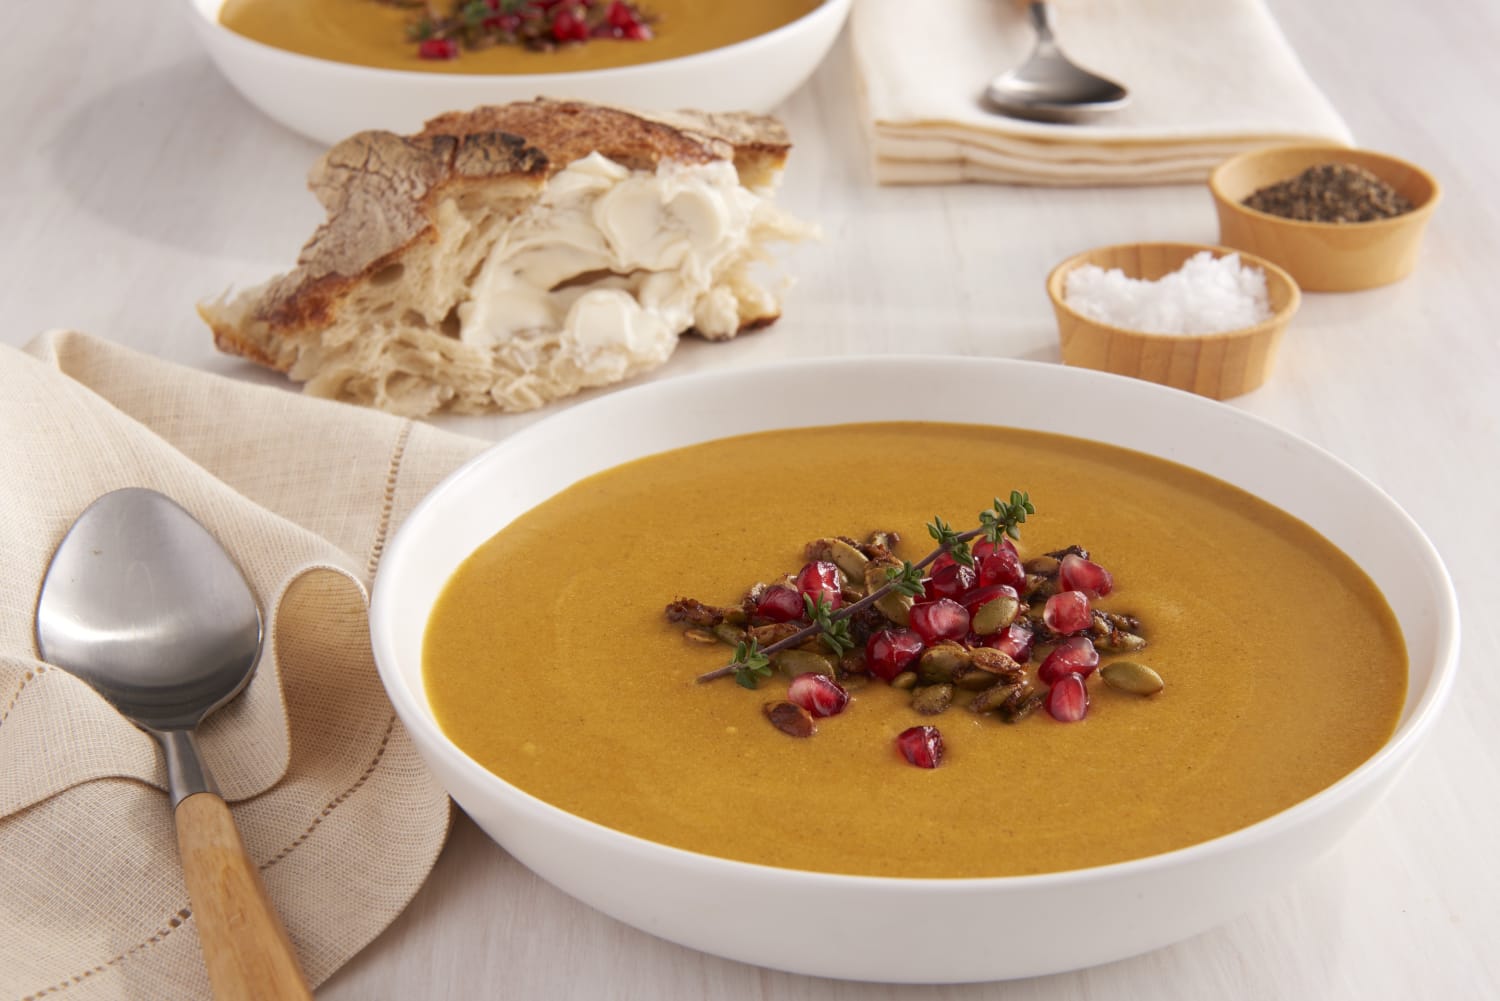 Check out this tasty vegan winter soup recipe that is so satisfying